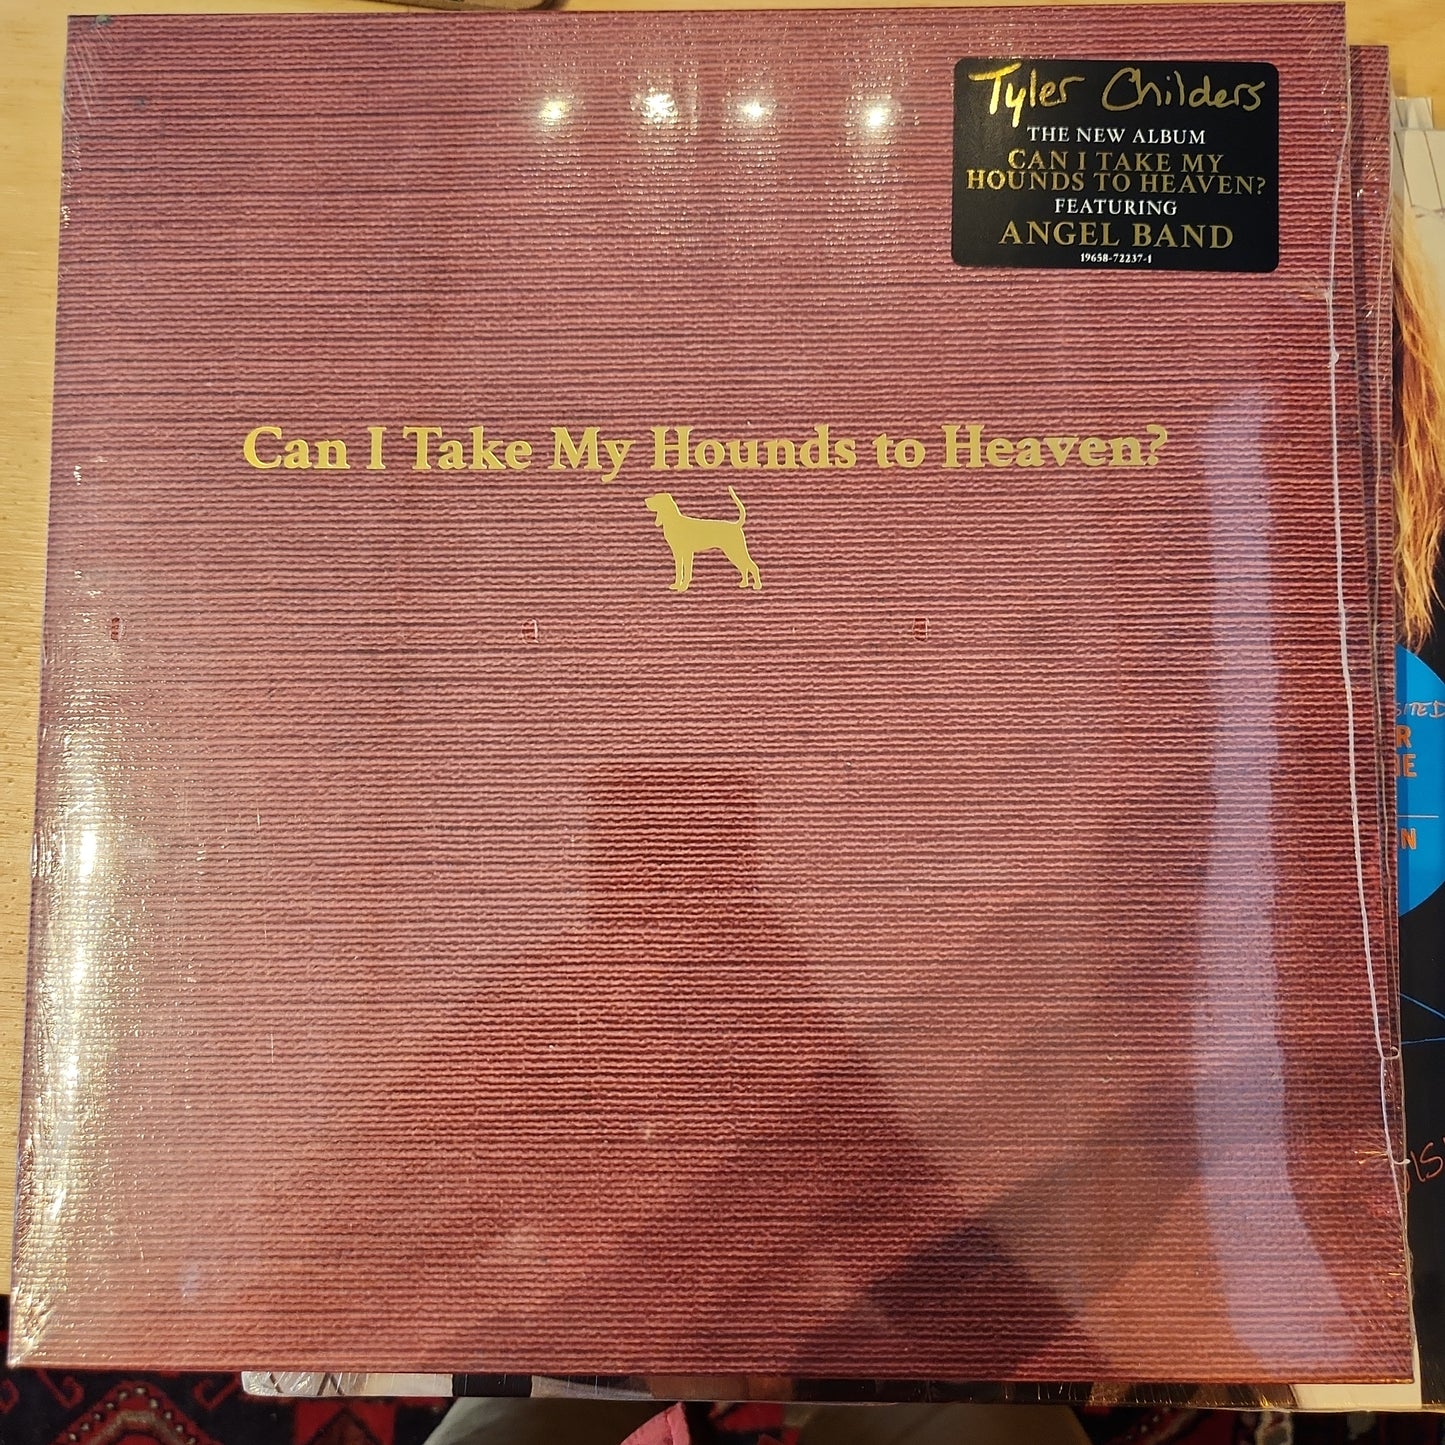 Tyler Childers - Can I take my hounds to heaven? - Triple Vinyl Box Set